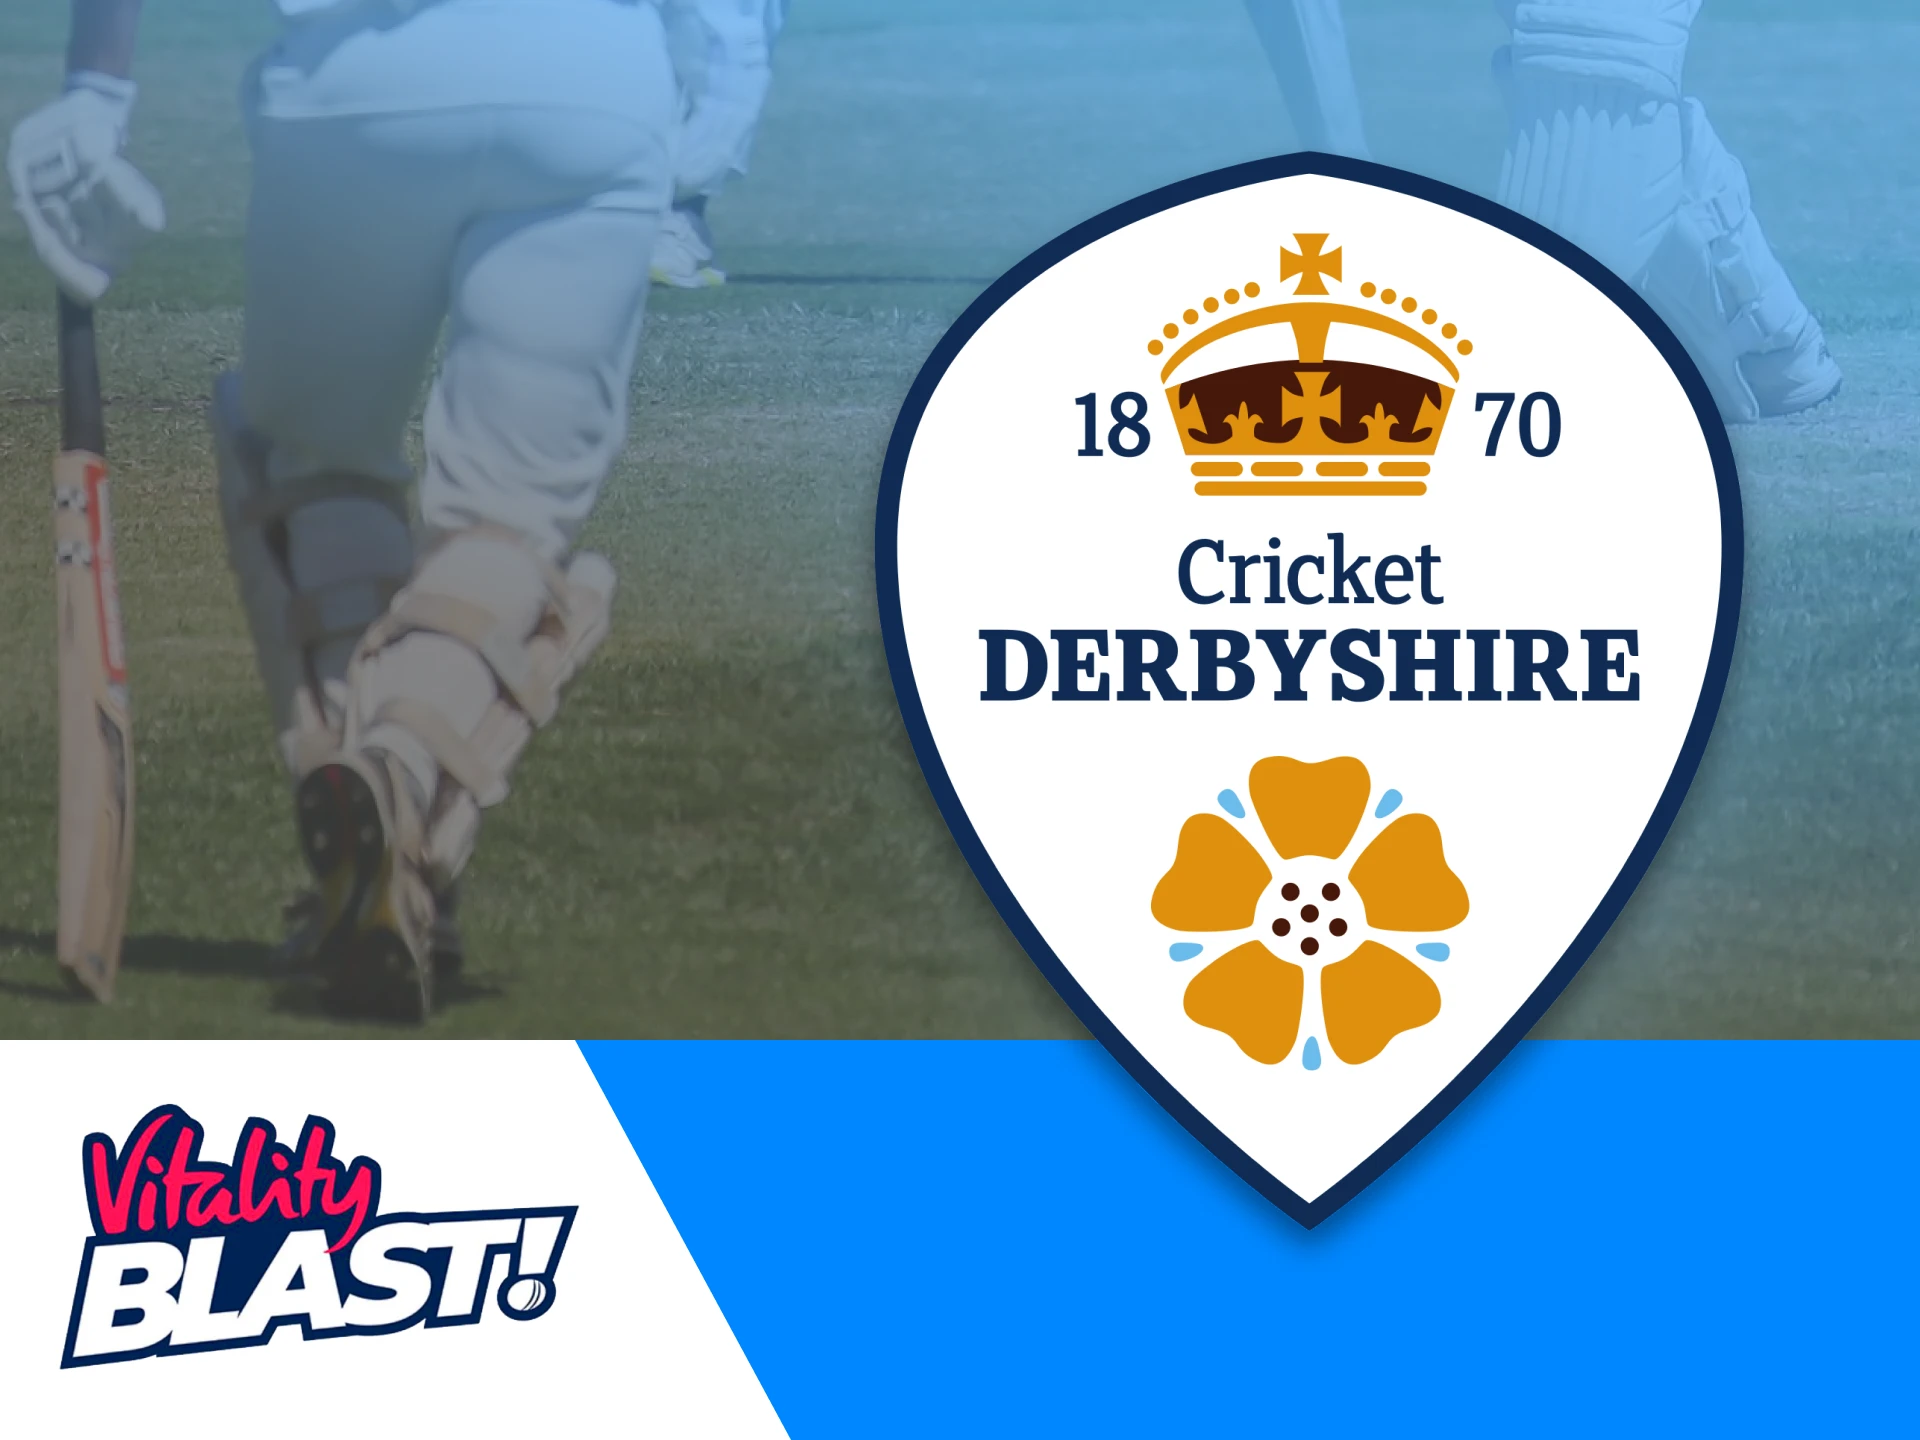 The team of Derbyshire is known as Derbyshire Falcons now.